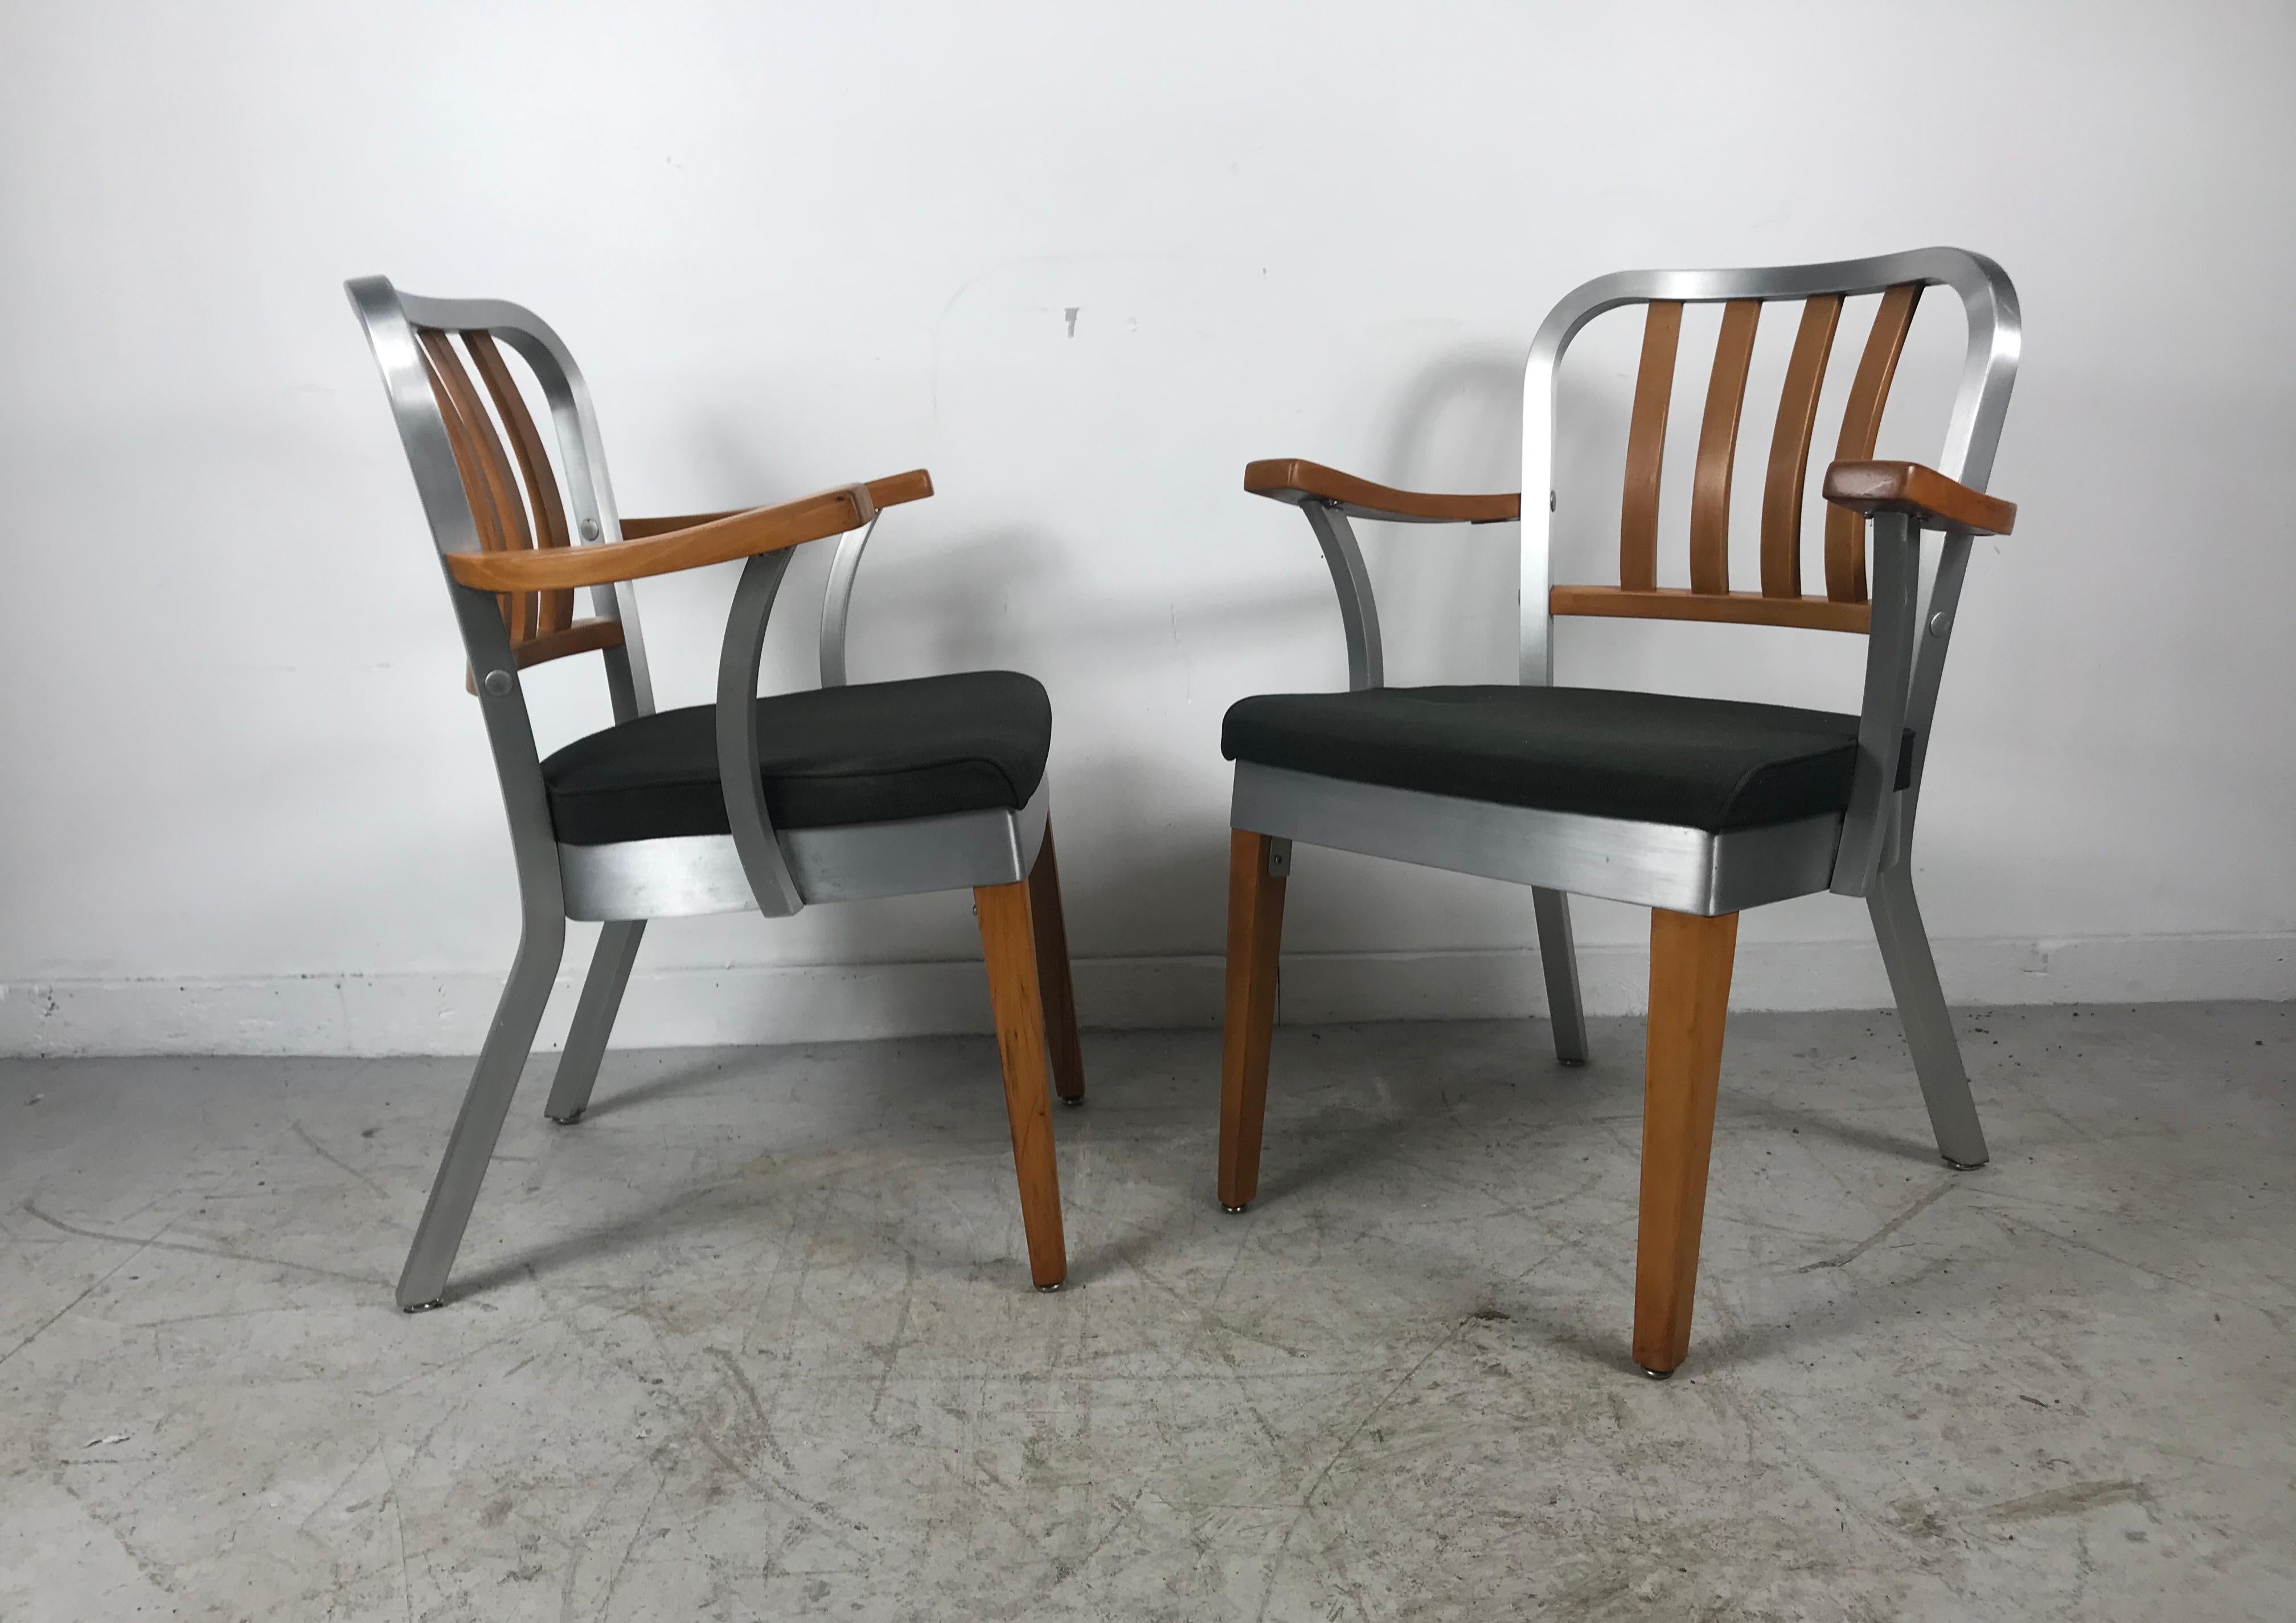 American Pair of Classic Aluminum and Maple Armchairs by Shaw Walker 1940s Industrial